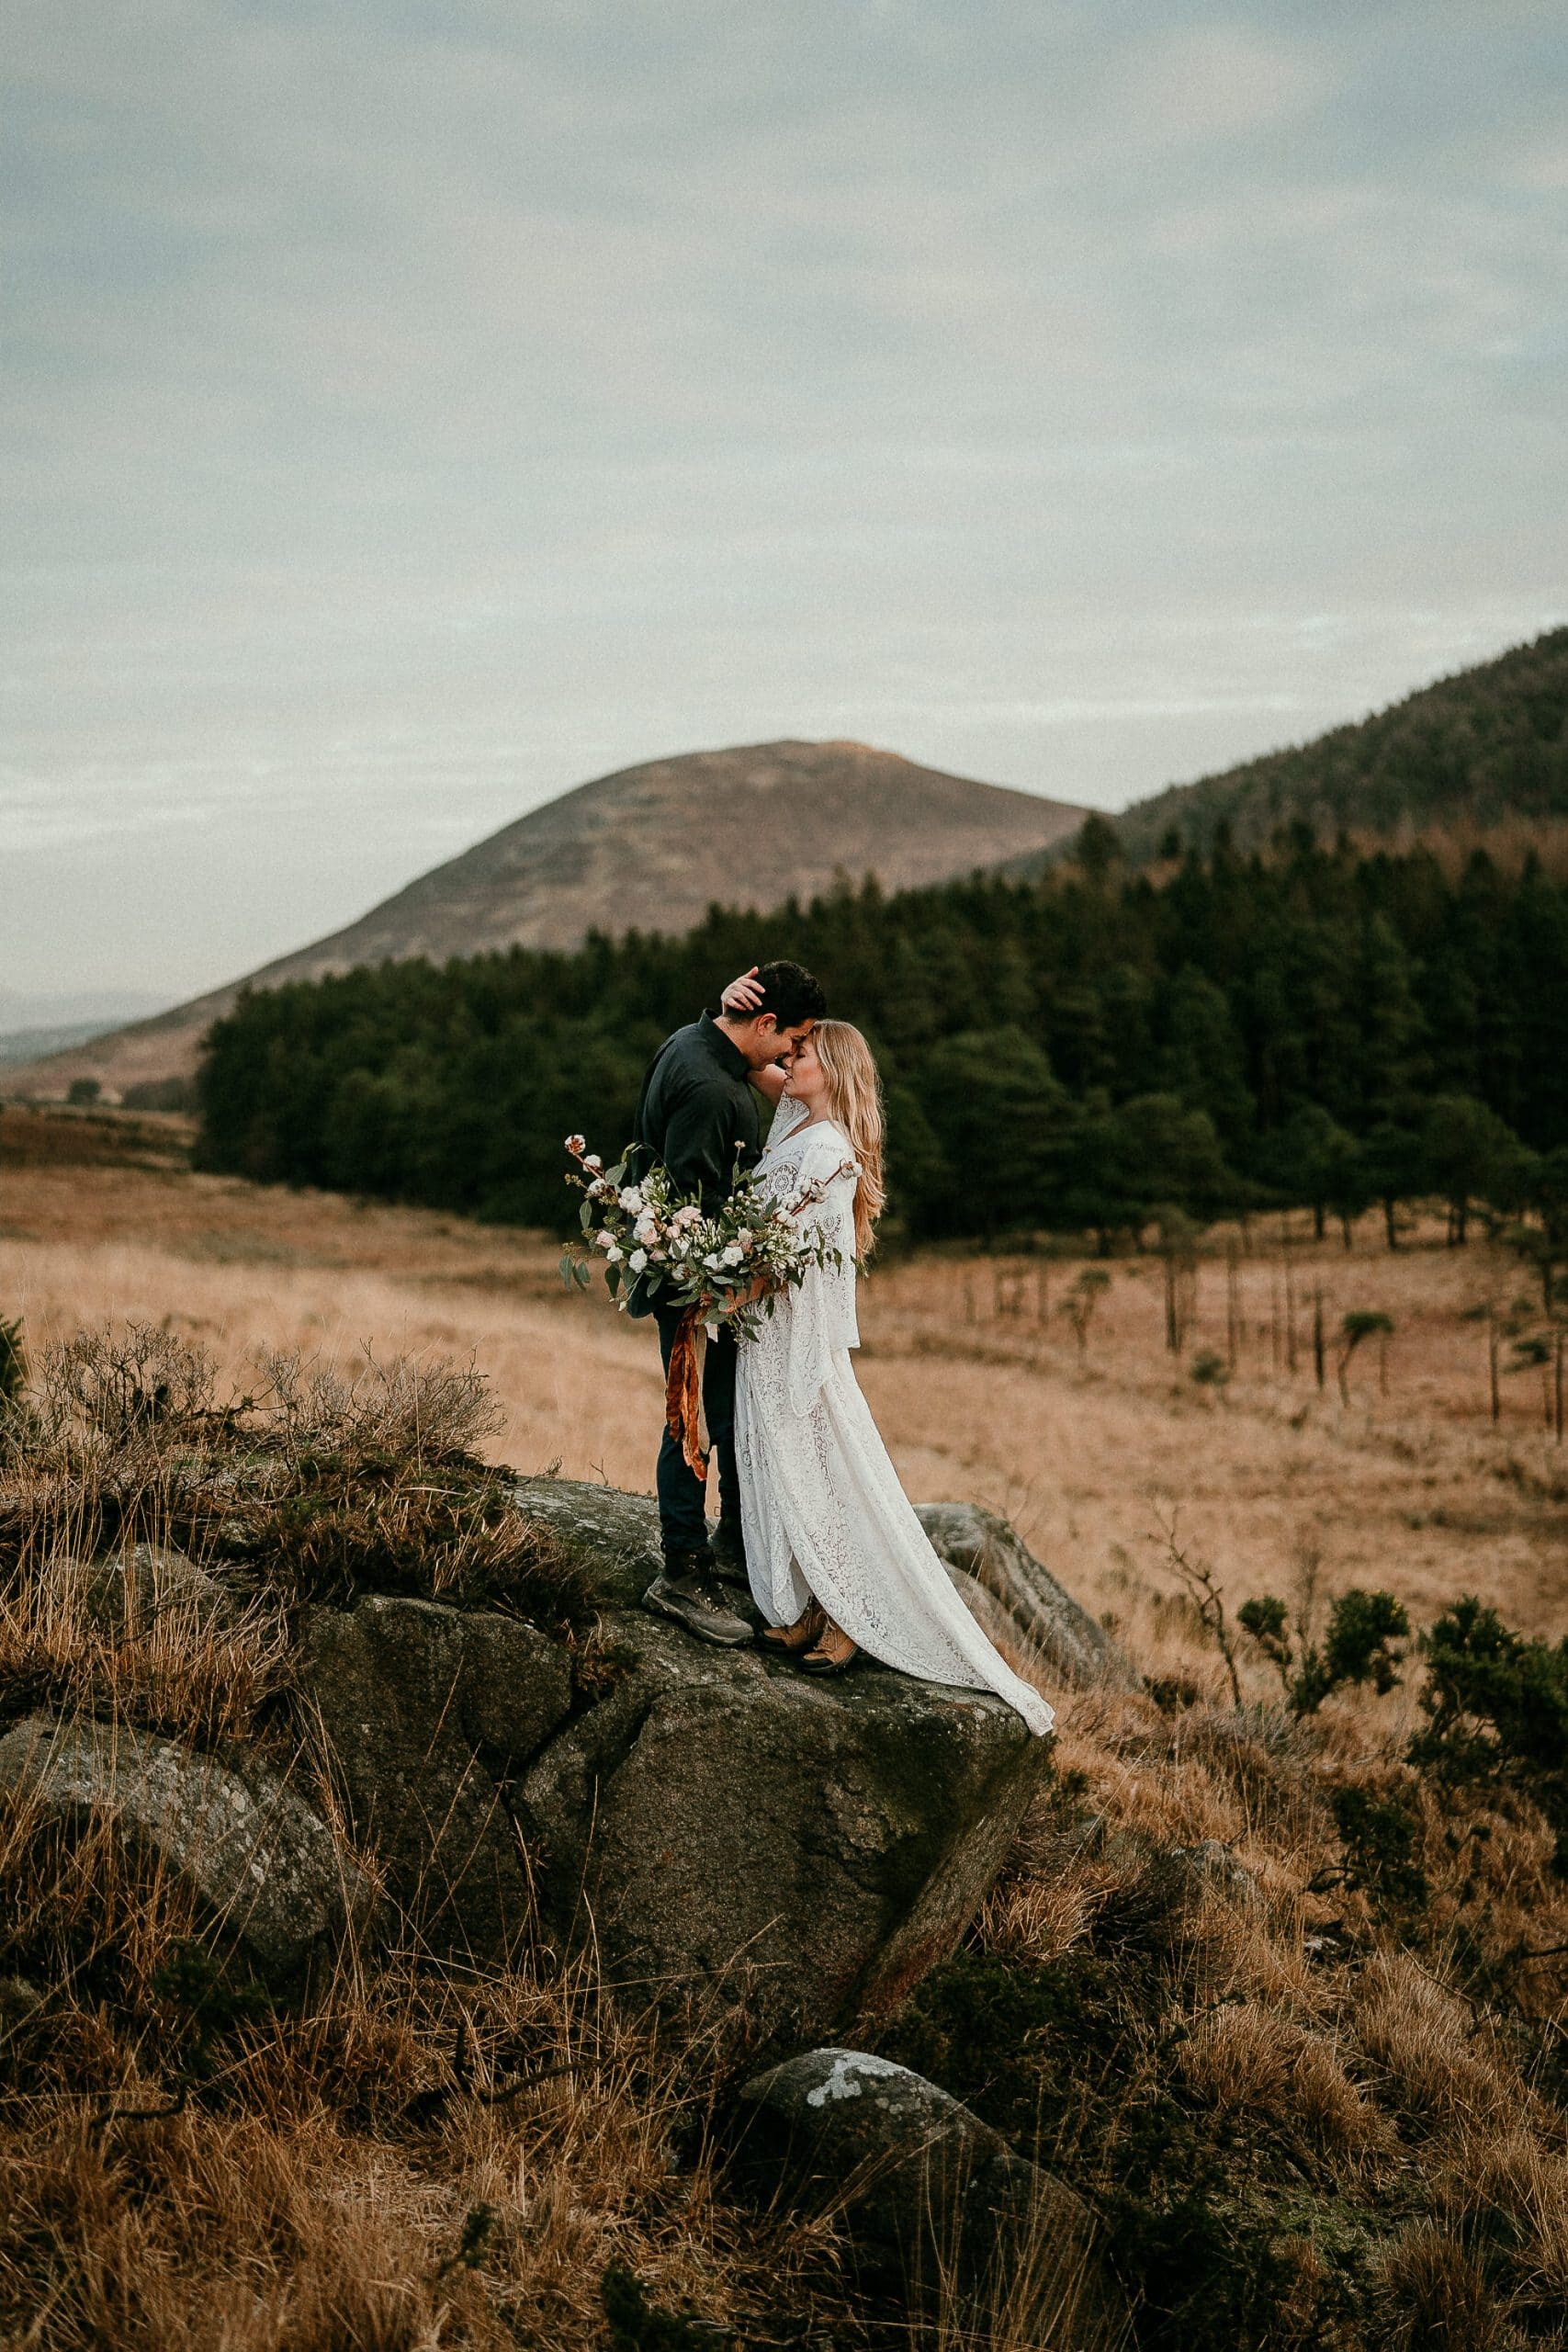 https://epiclovephotography.com/wp-content/uploads/2020/02/A-Mourne-Mountains-Elopement-Inspiration-Shoot-10001-4-scaled.jpg